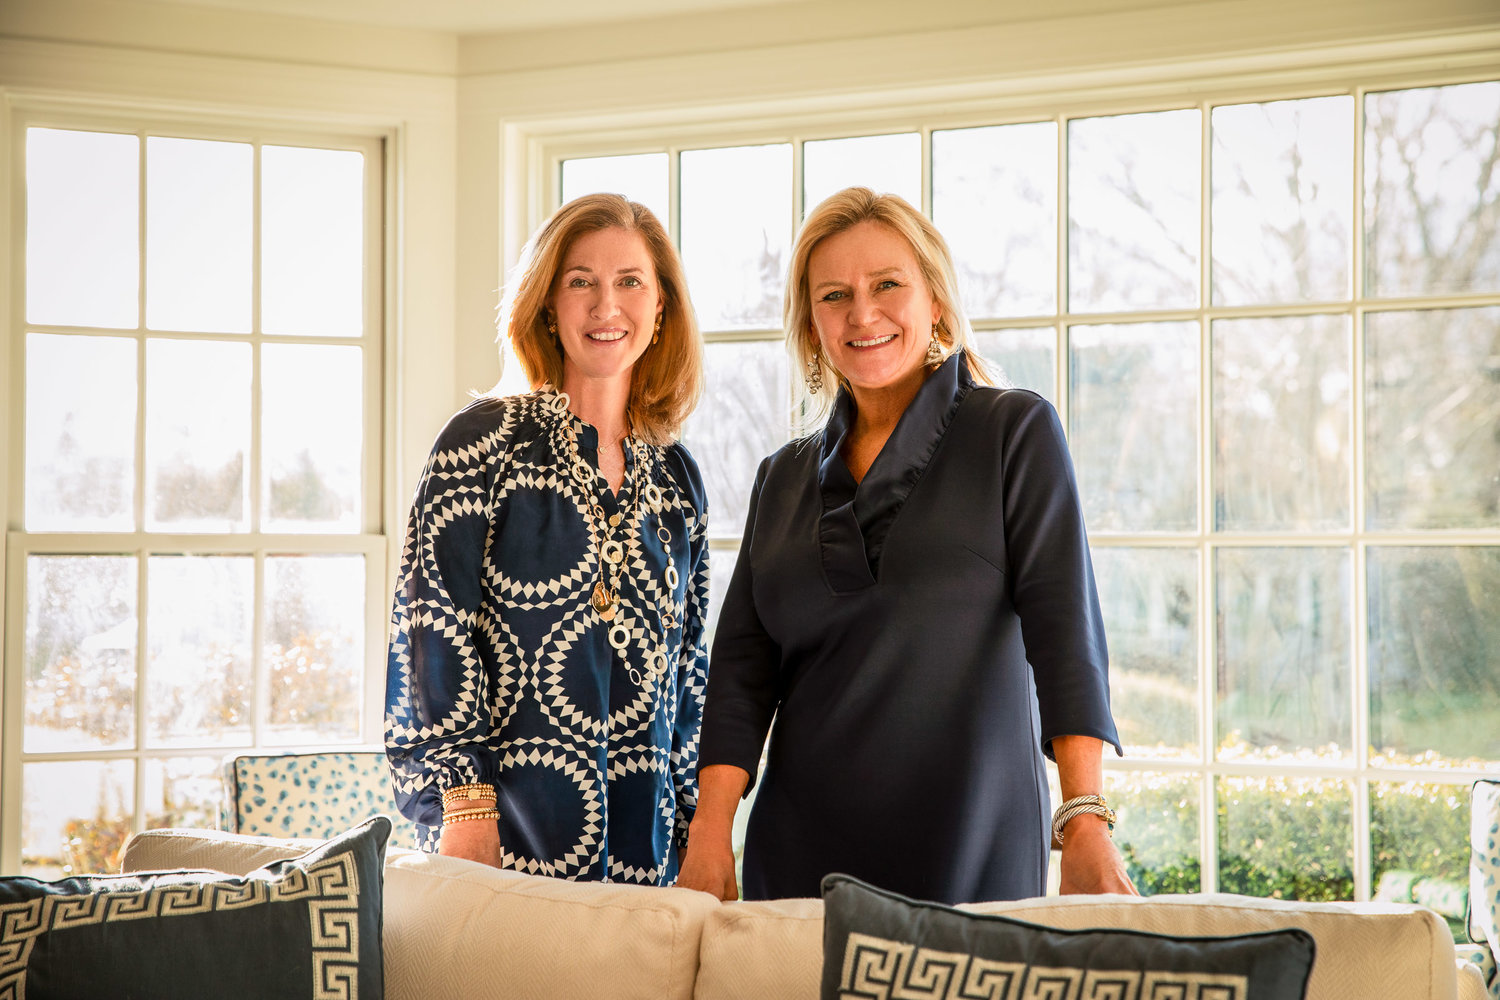 Thought they had been friends and colleagues for a long time, Elizabeth Kirk and Lisa Schryver didn’t decide to form their own team until New Year’s Day. What followed was the most historic year anyone could imagine.